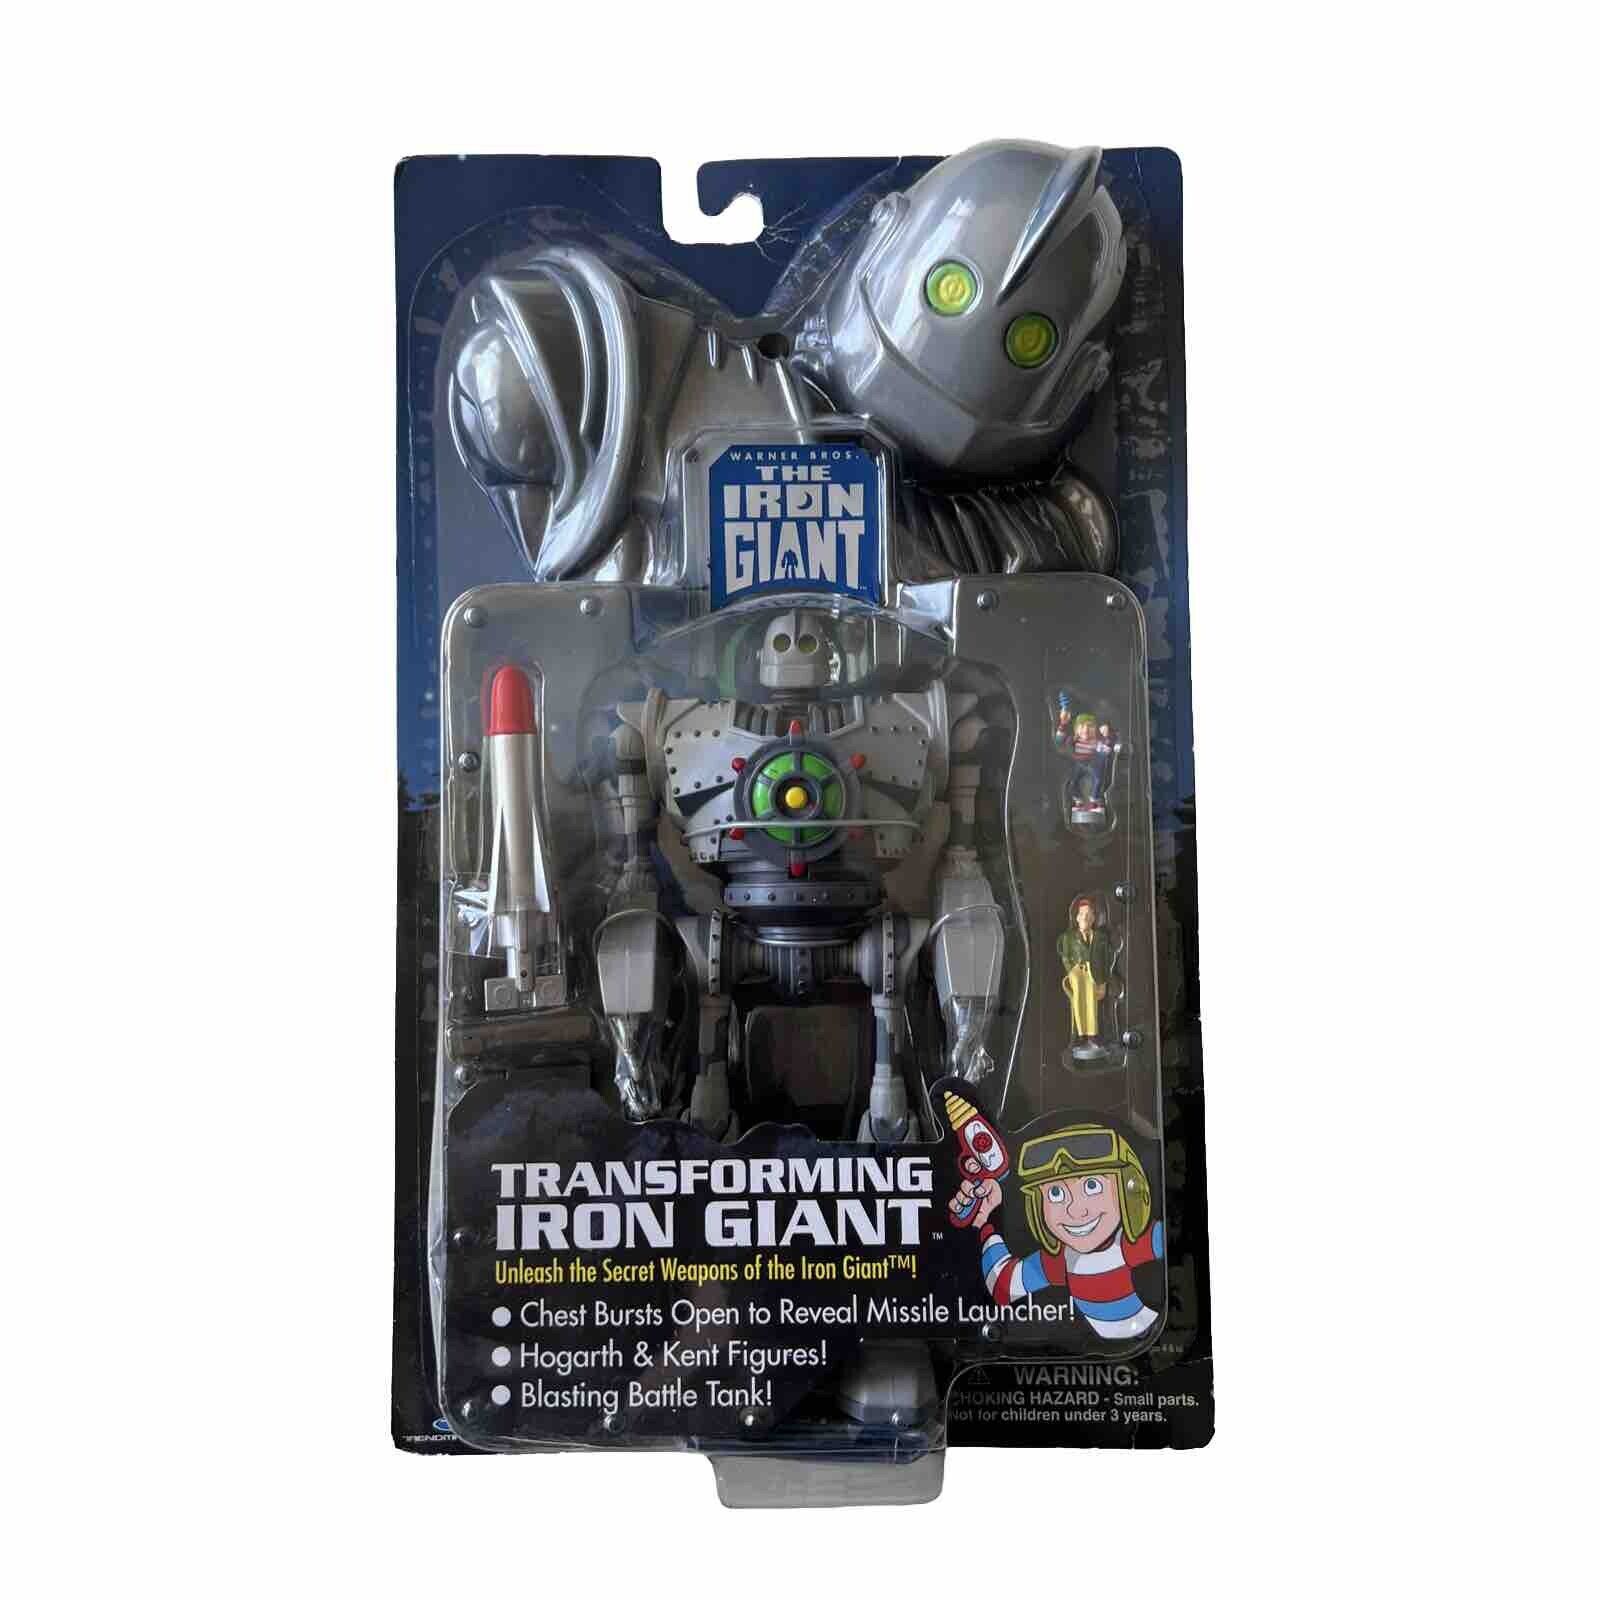 Transforming The IRON GIANT Warner Bros. 1999 Trendmasters 10258 Toy Figure NEW